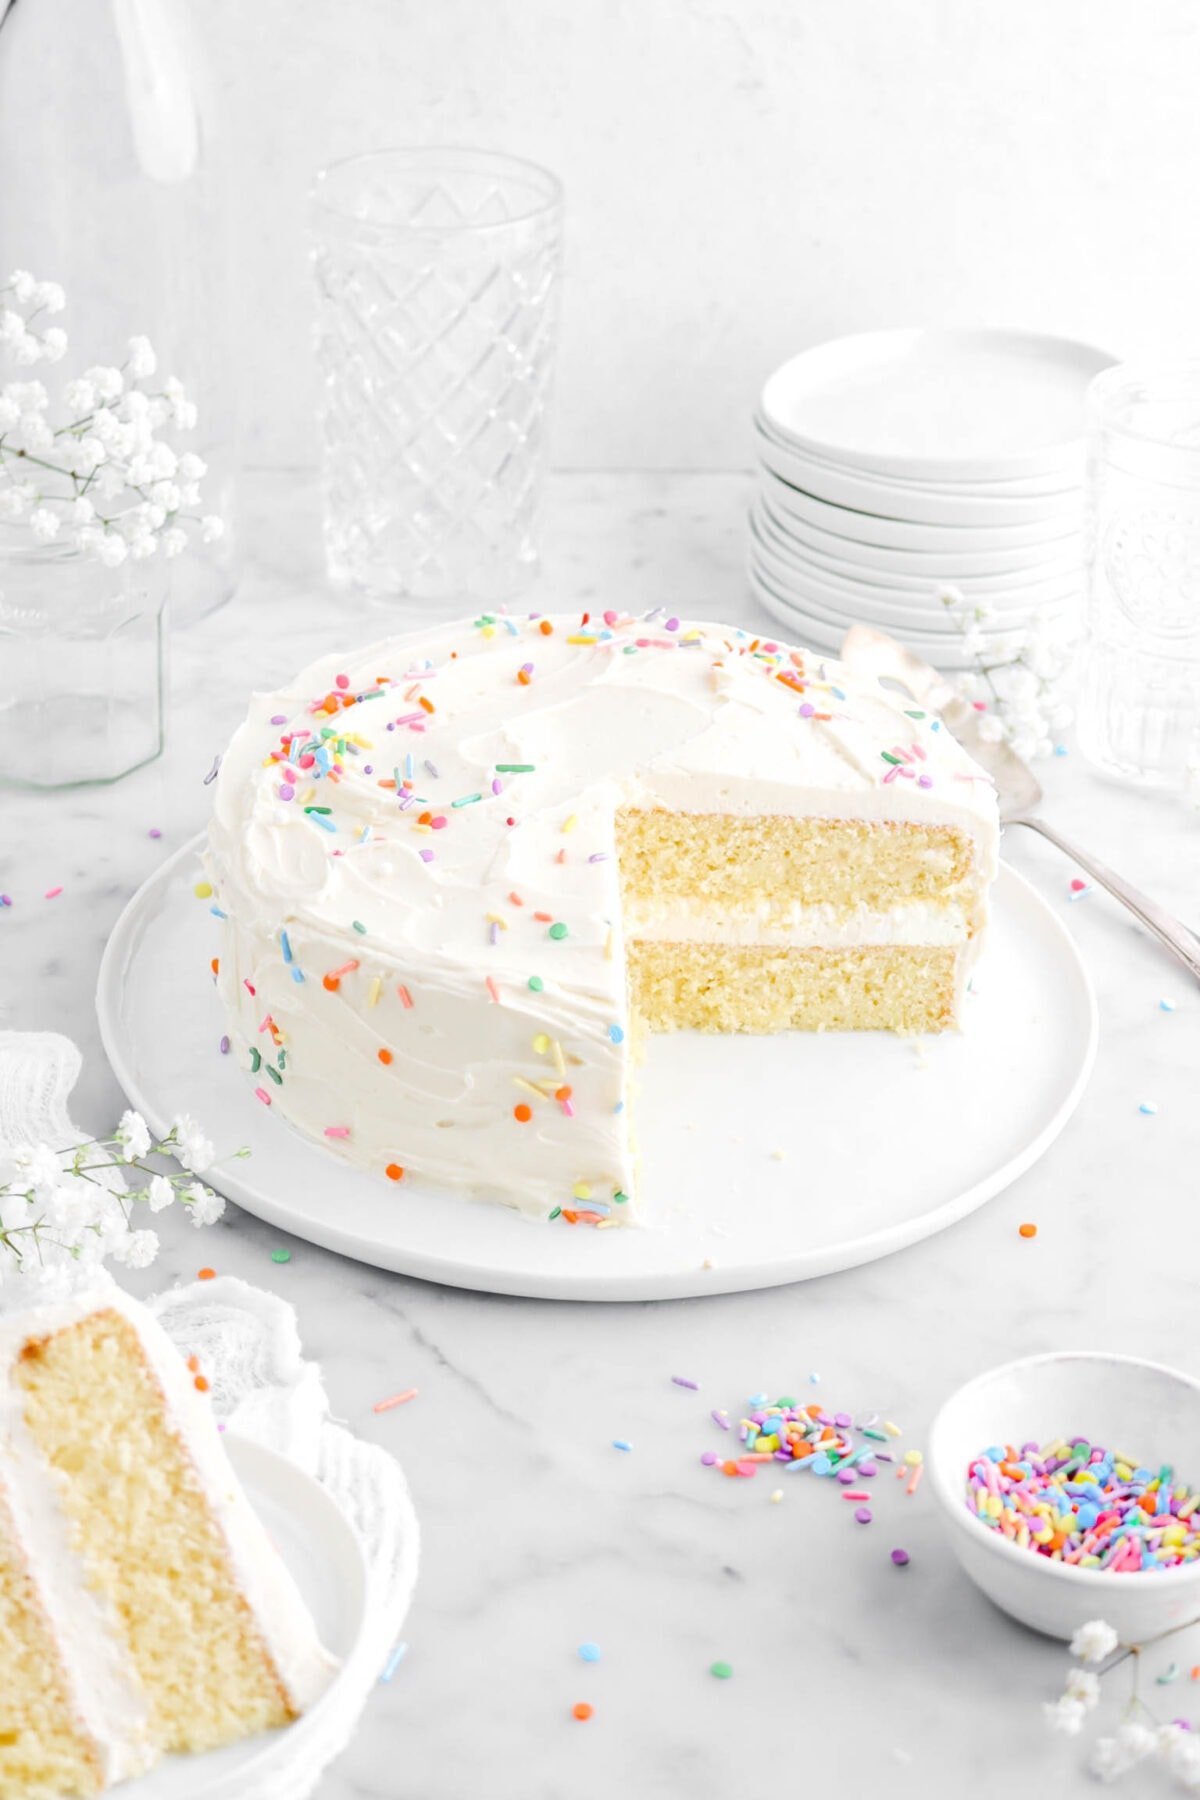 angled shot of cut vanilla cake on white plate with a slice of cake on white plate in front of cake with sprinkles and white flowers around.